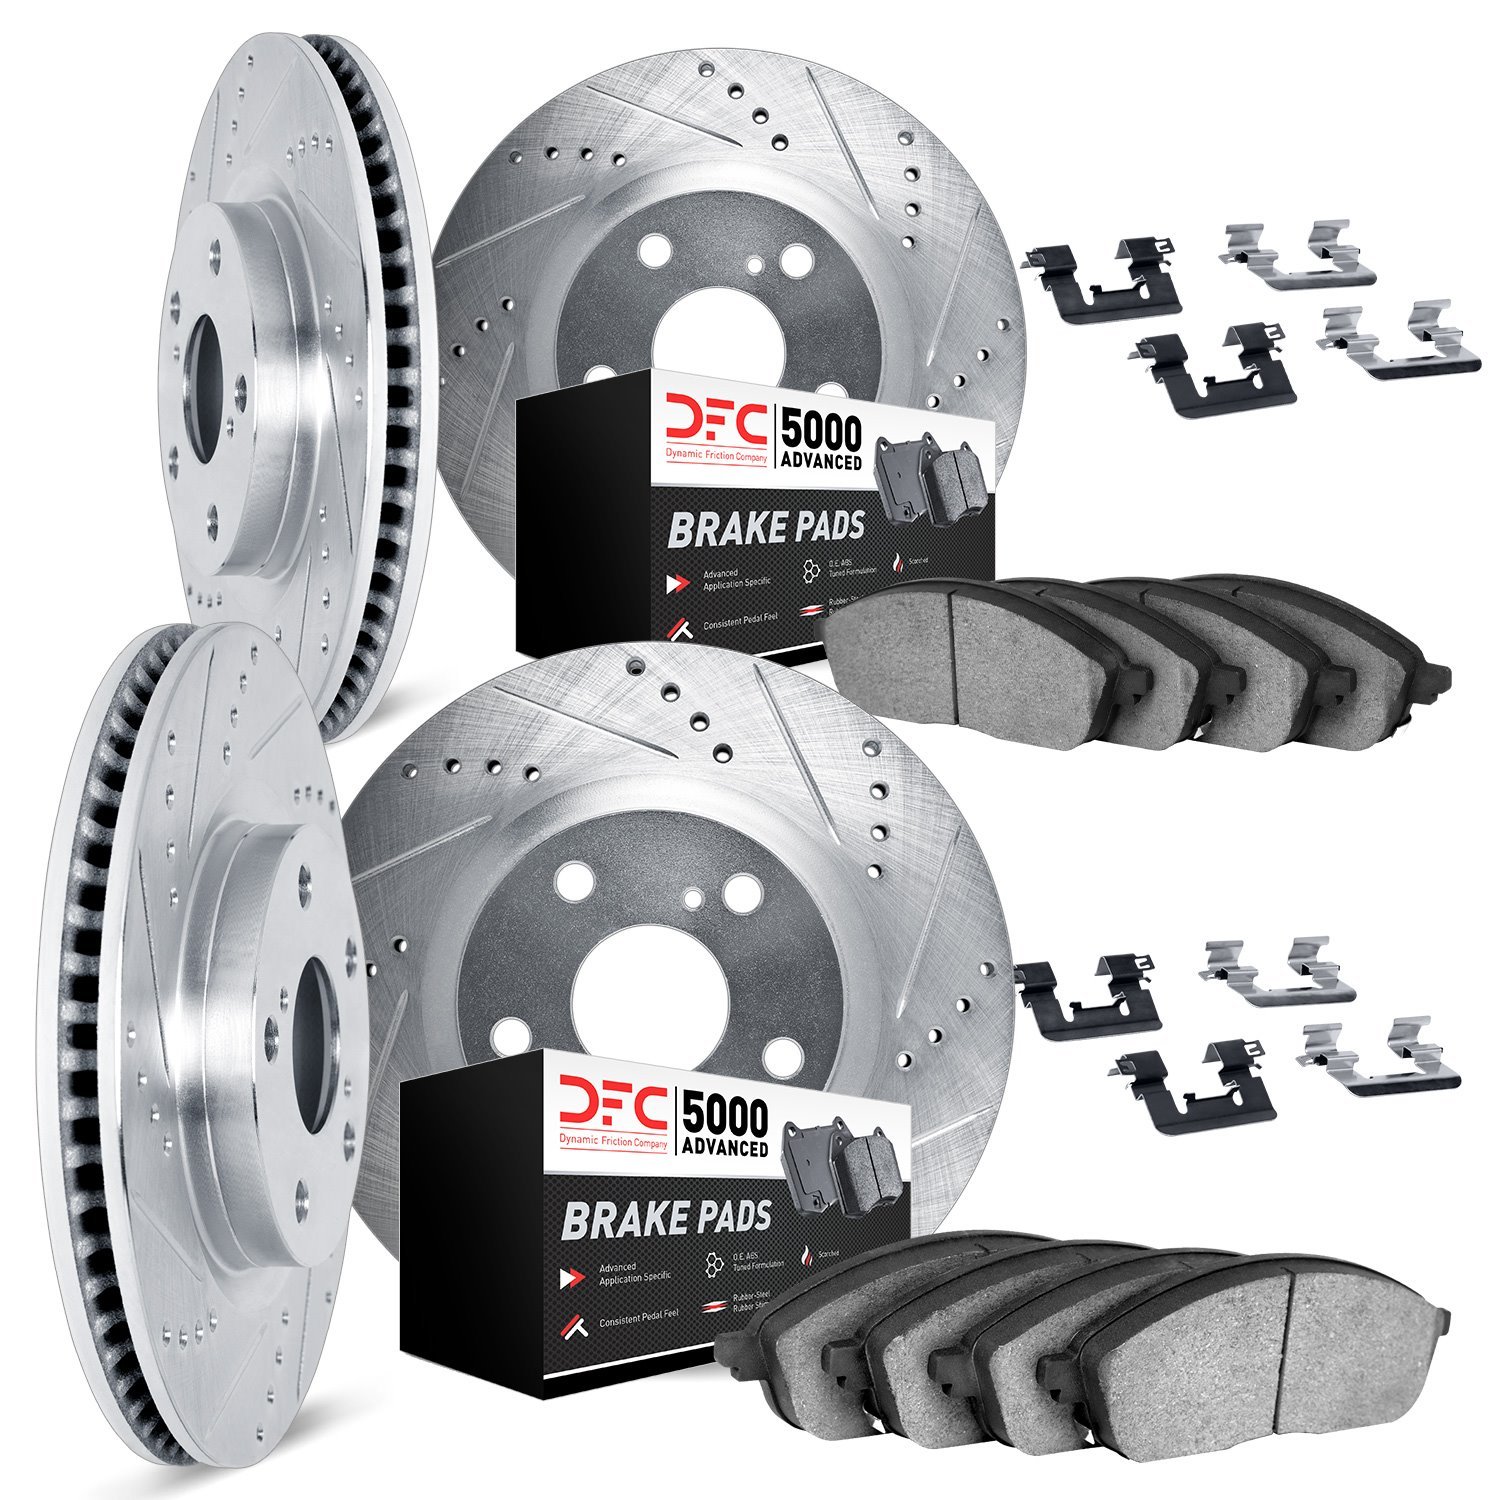 7514-67122 Drilled/Slotted Brake Rotors w/5000 Advanced Brake Pads Kit & Hardware [Silver], Fits Select Infiniti/Nissan, Positio